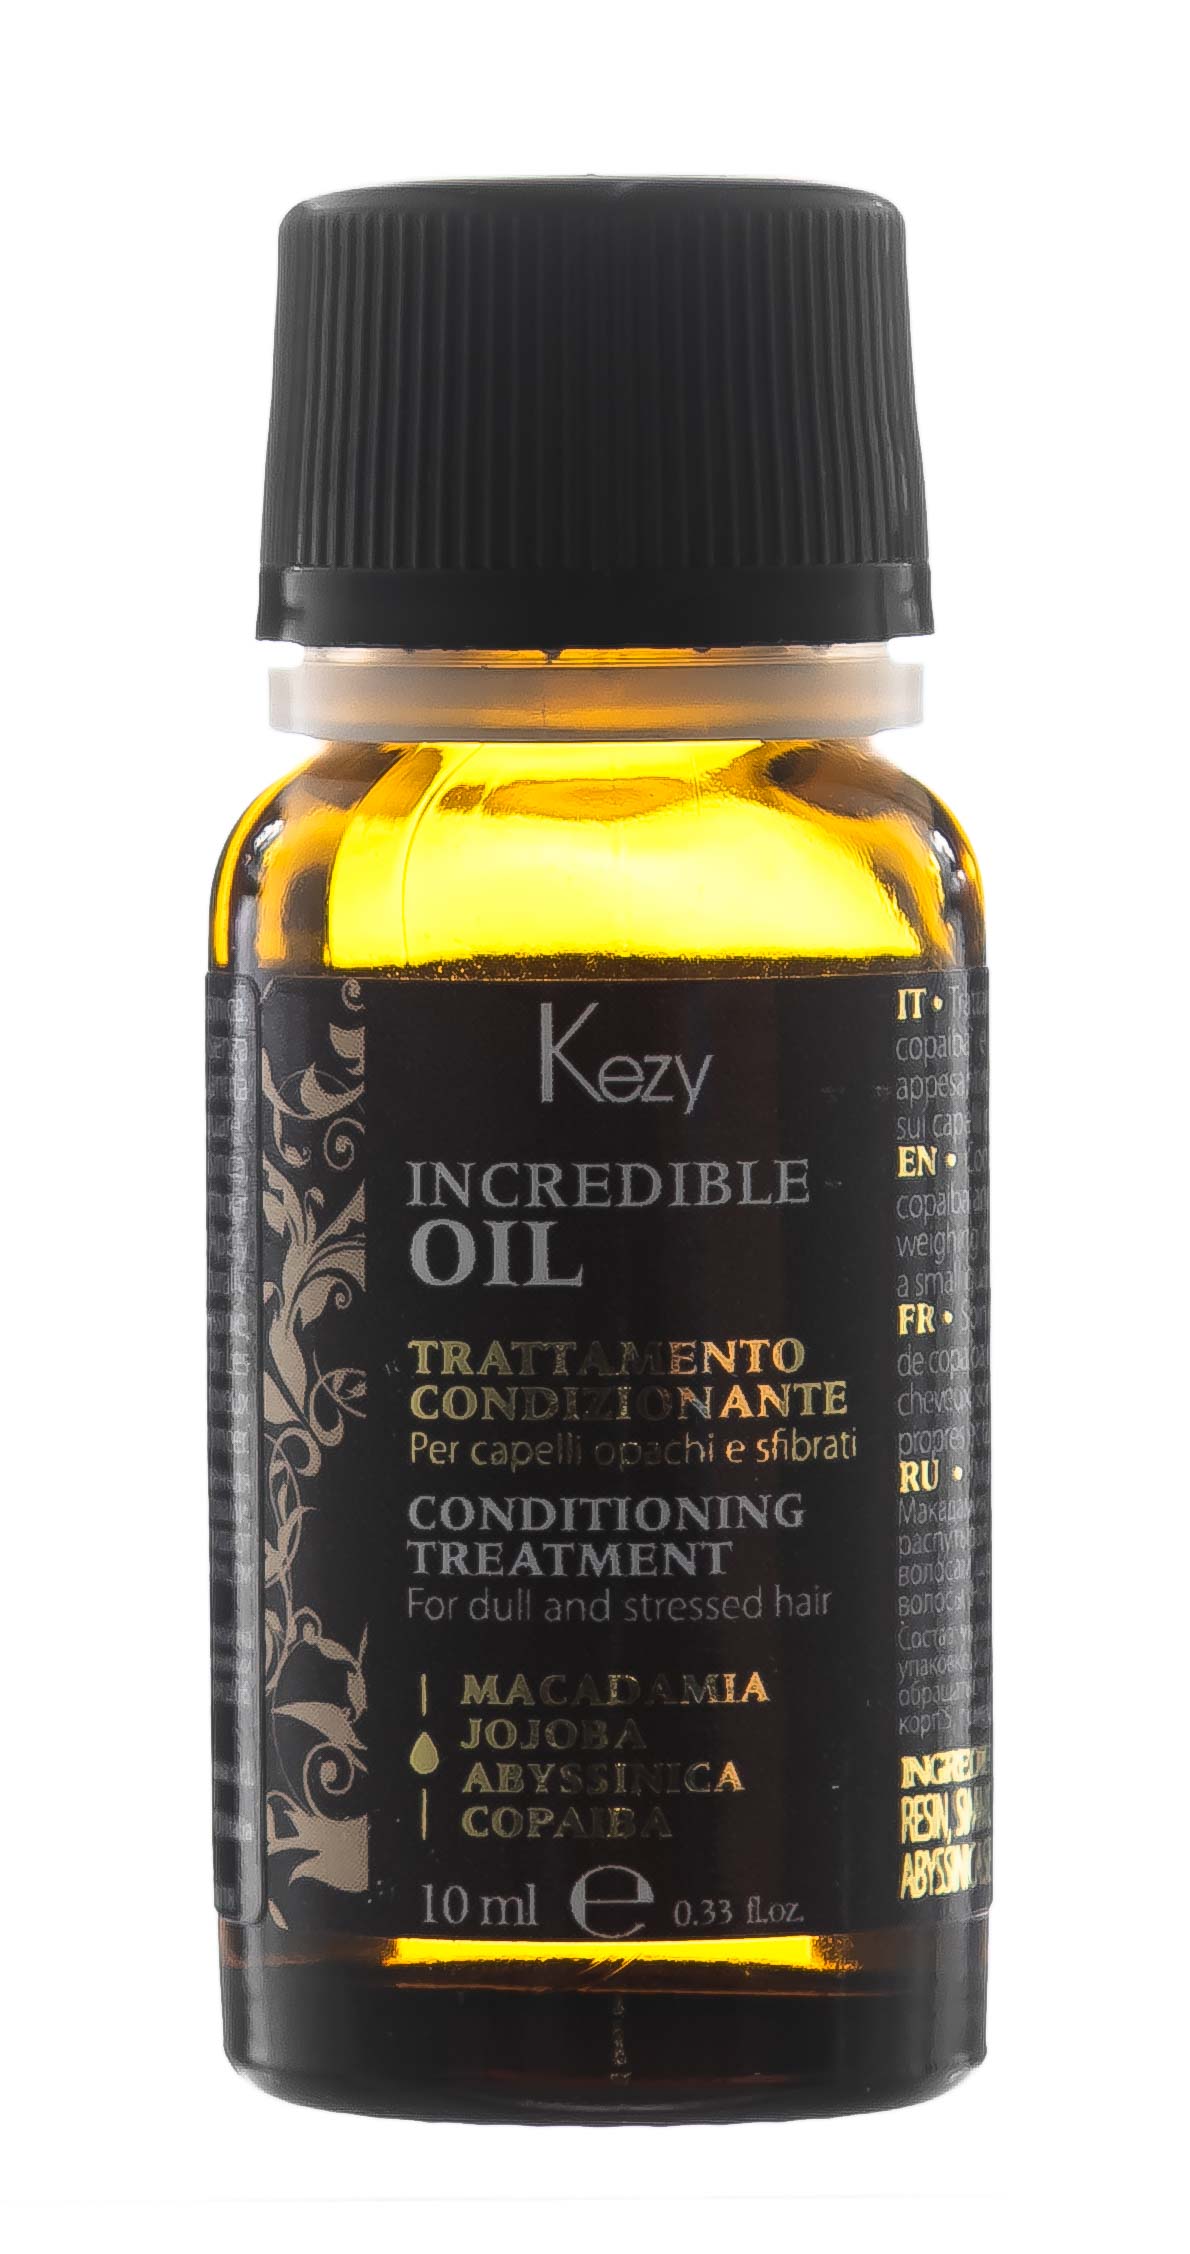 Kezy Масло для волос Conditioning Treatment Incredible Oil, 10 мл (Kezy, Эфирные масла) масло для волос kezy kezy incredible oil масло для волос 10 мл